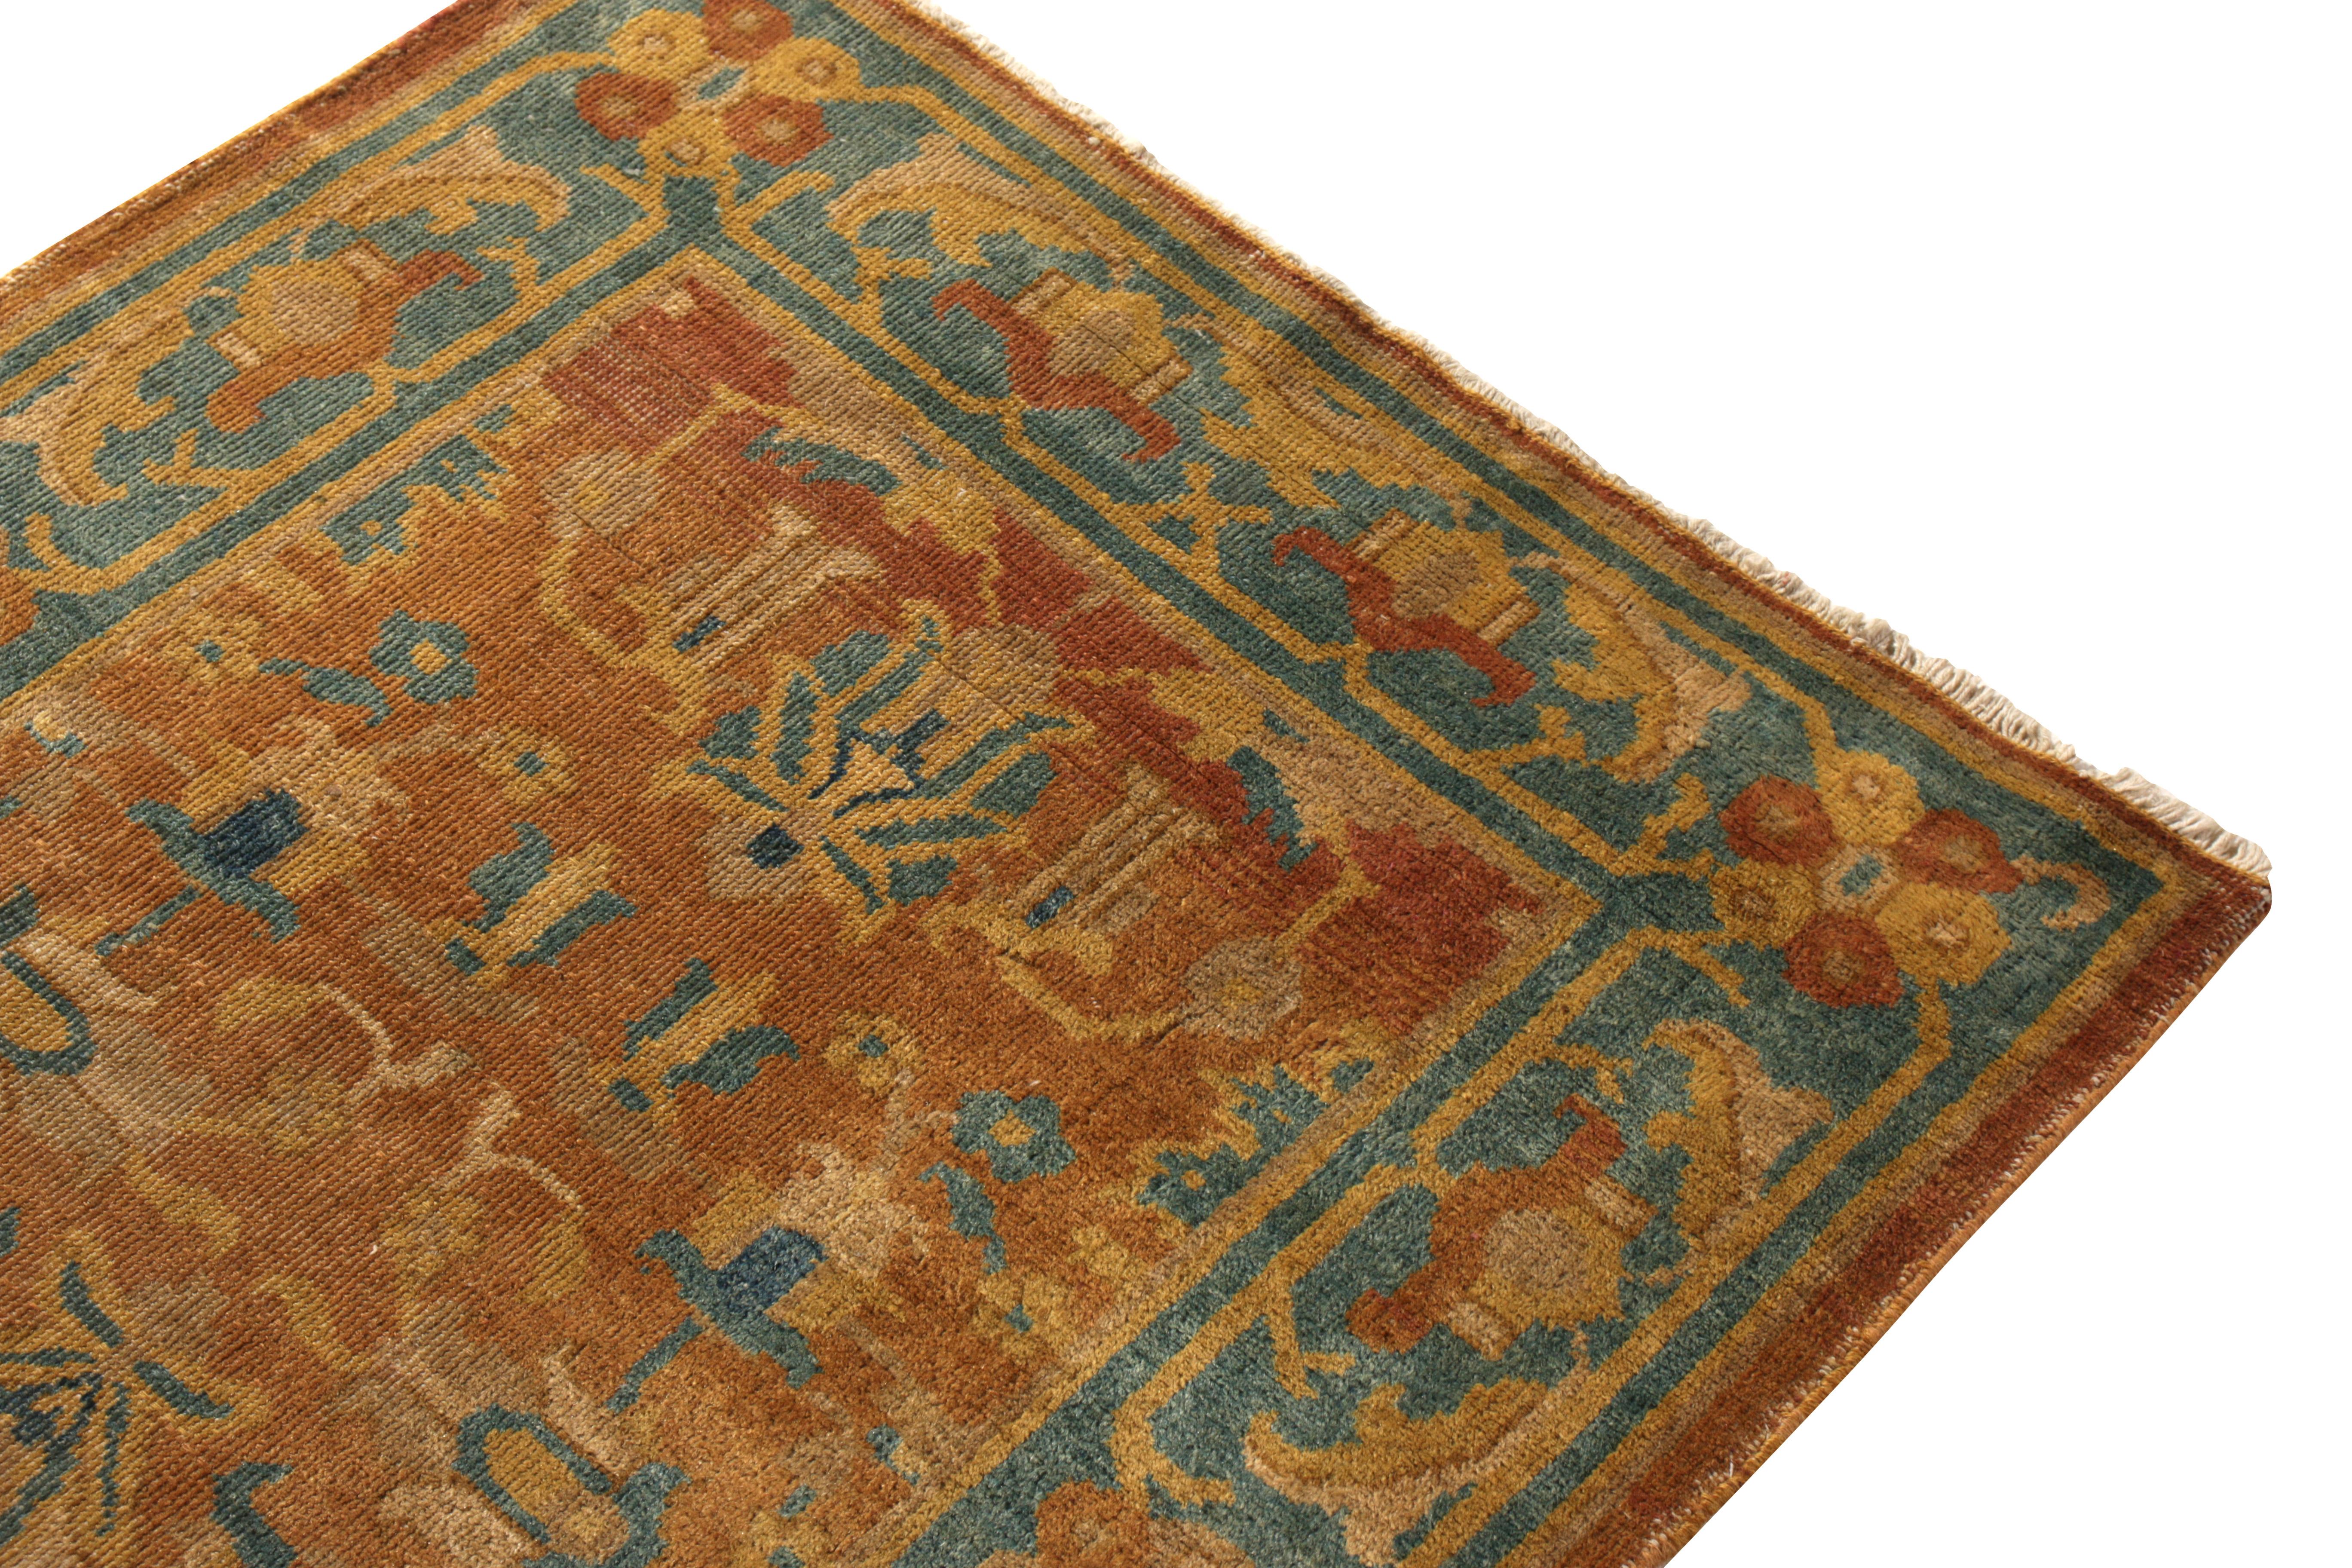 Indian Early 20th Century Antique Runner Beige Blue Geometric Floral Amritsar Rug